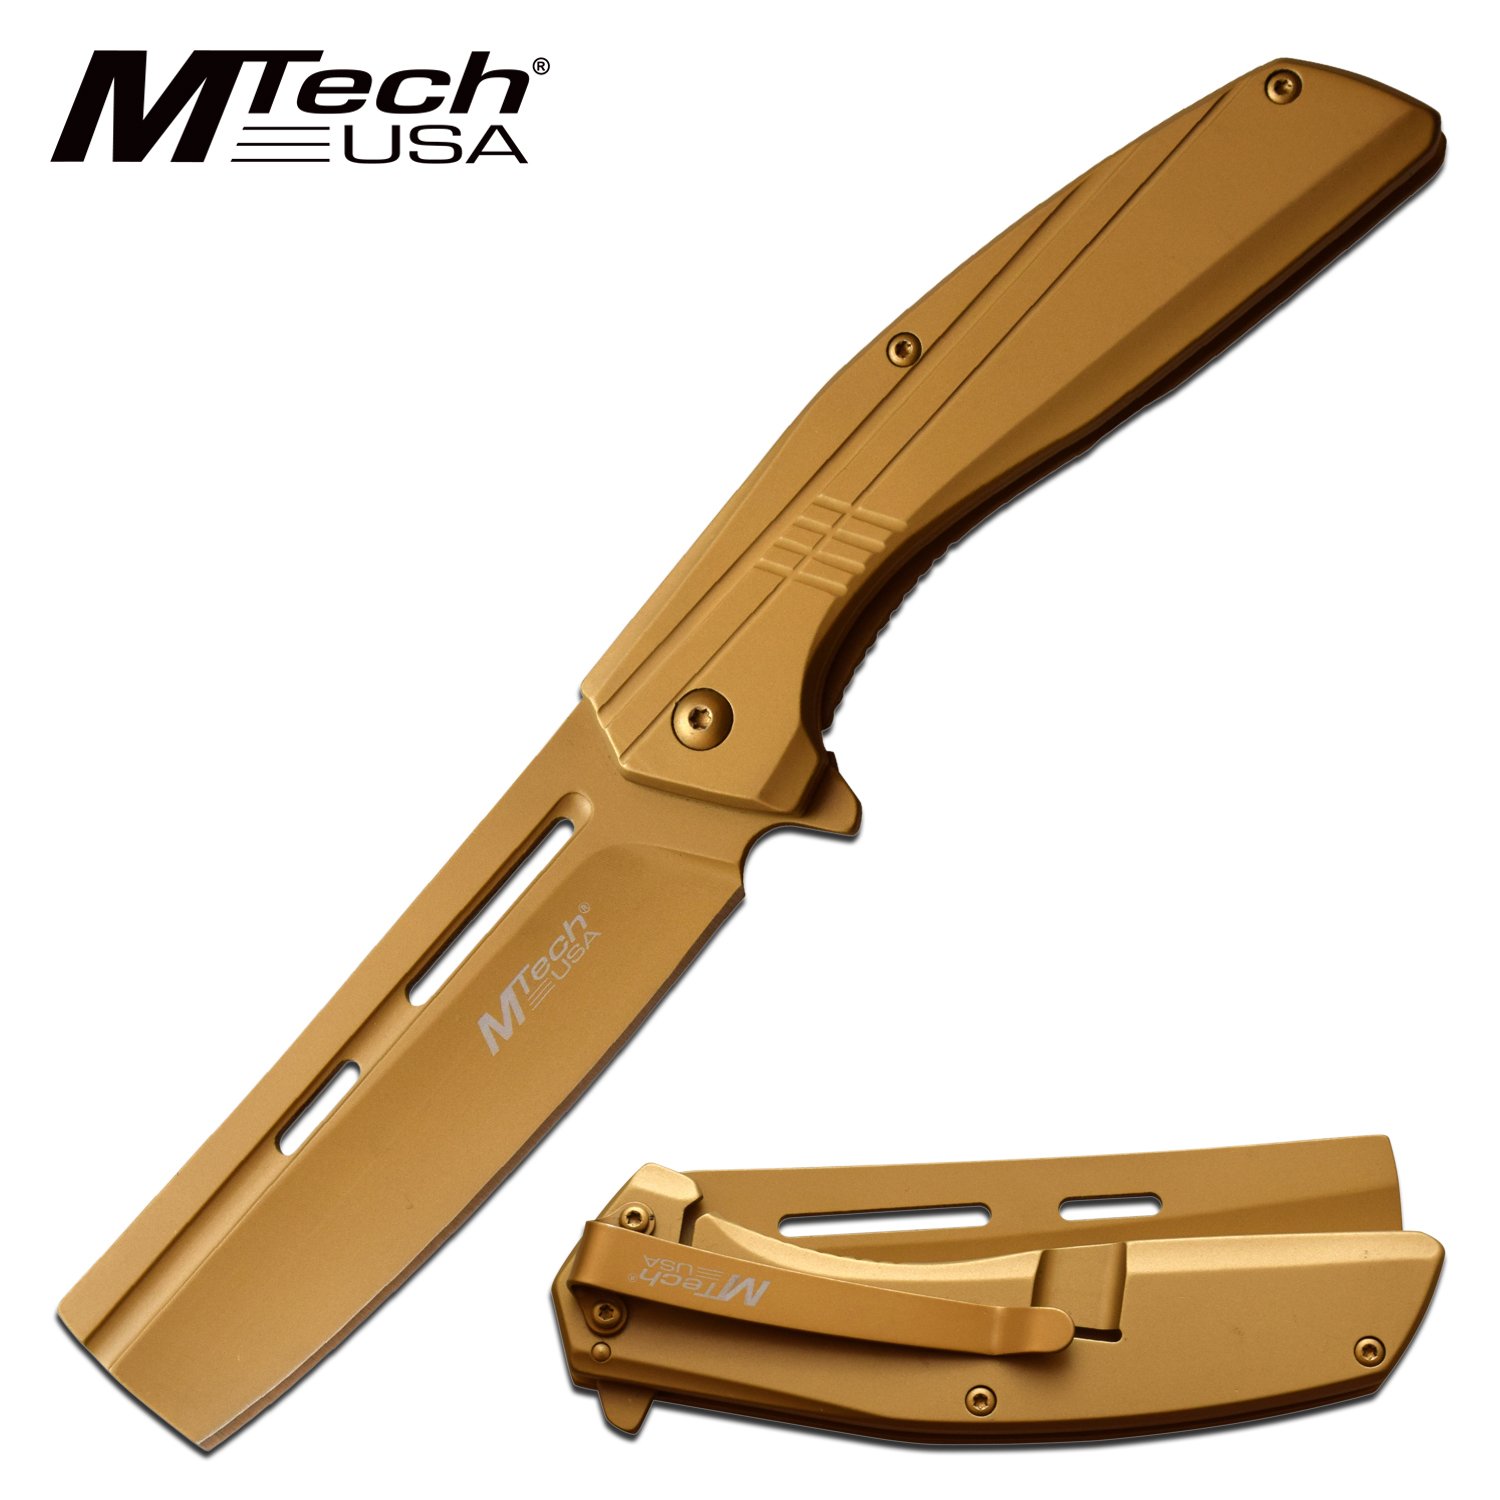 Spring-Assist Folding Knife Mtech 3.5in. Cleaver Blade Stainless Steel - Gold